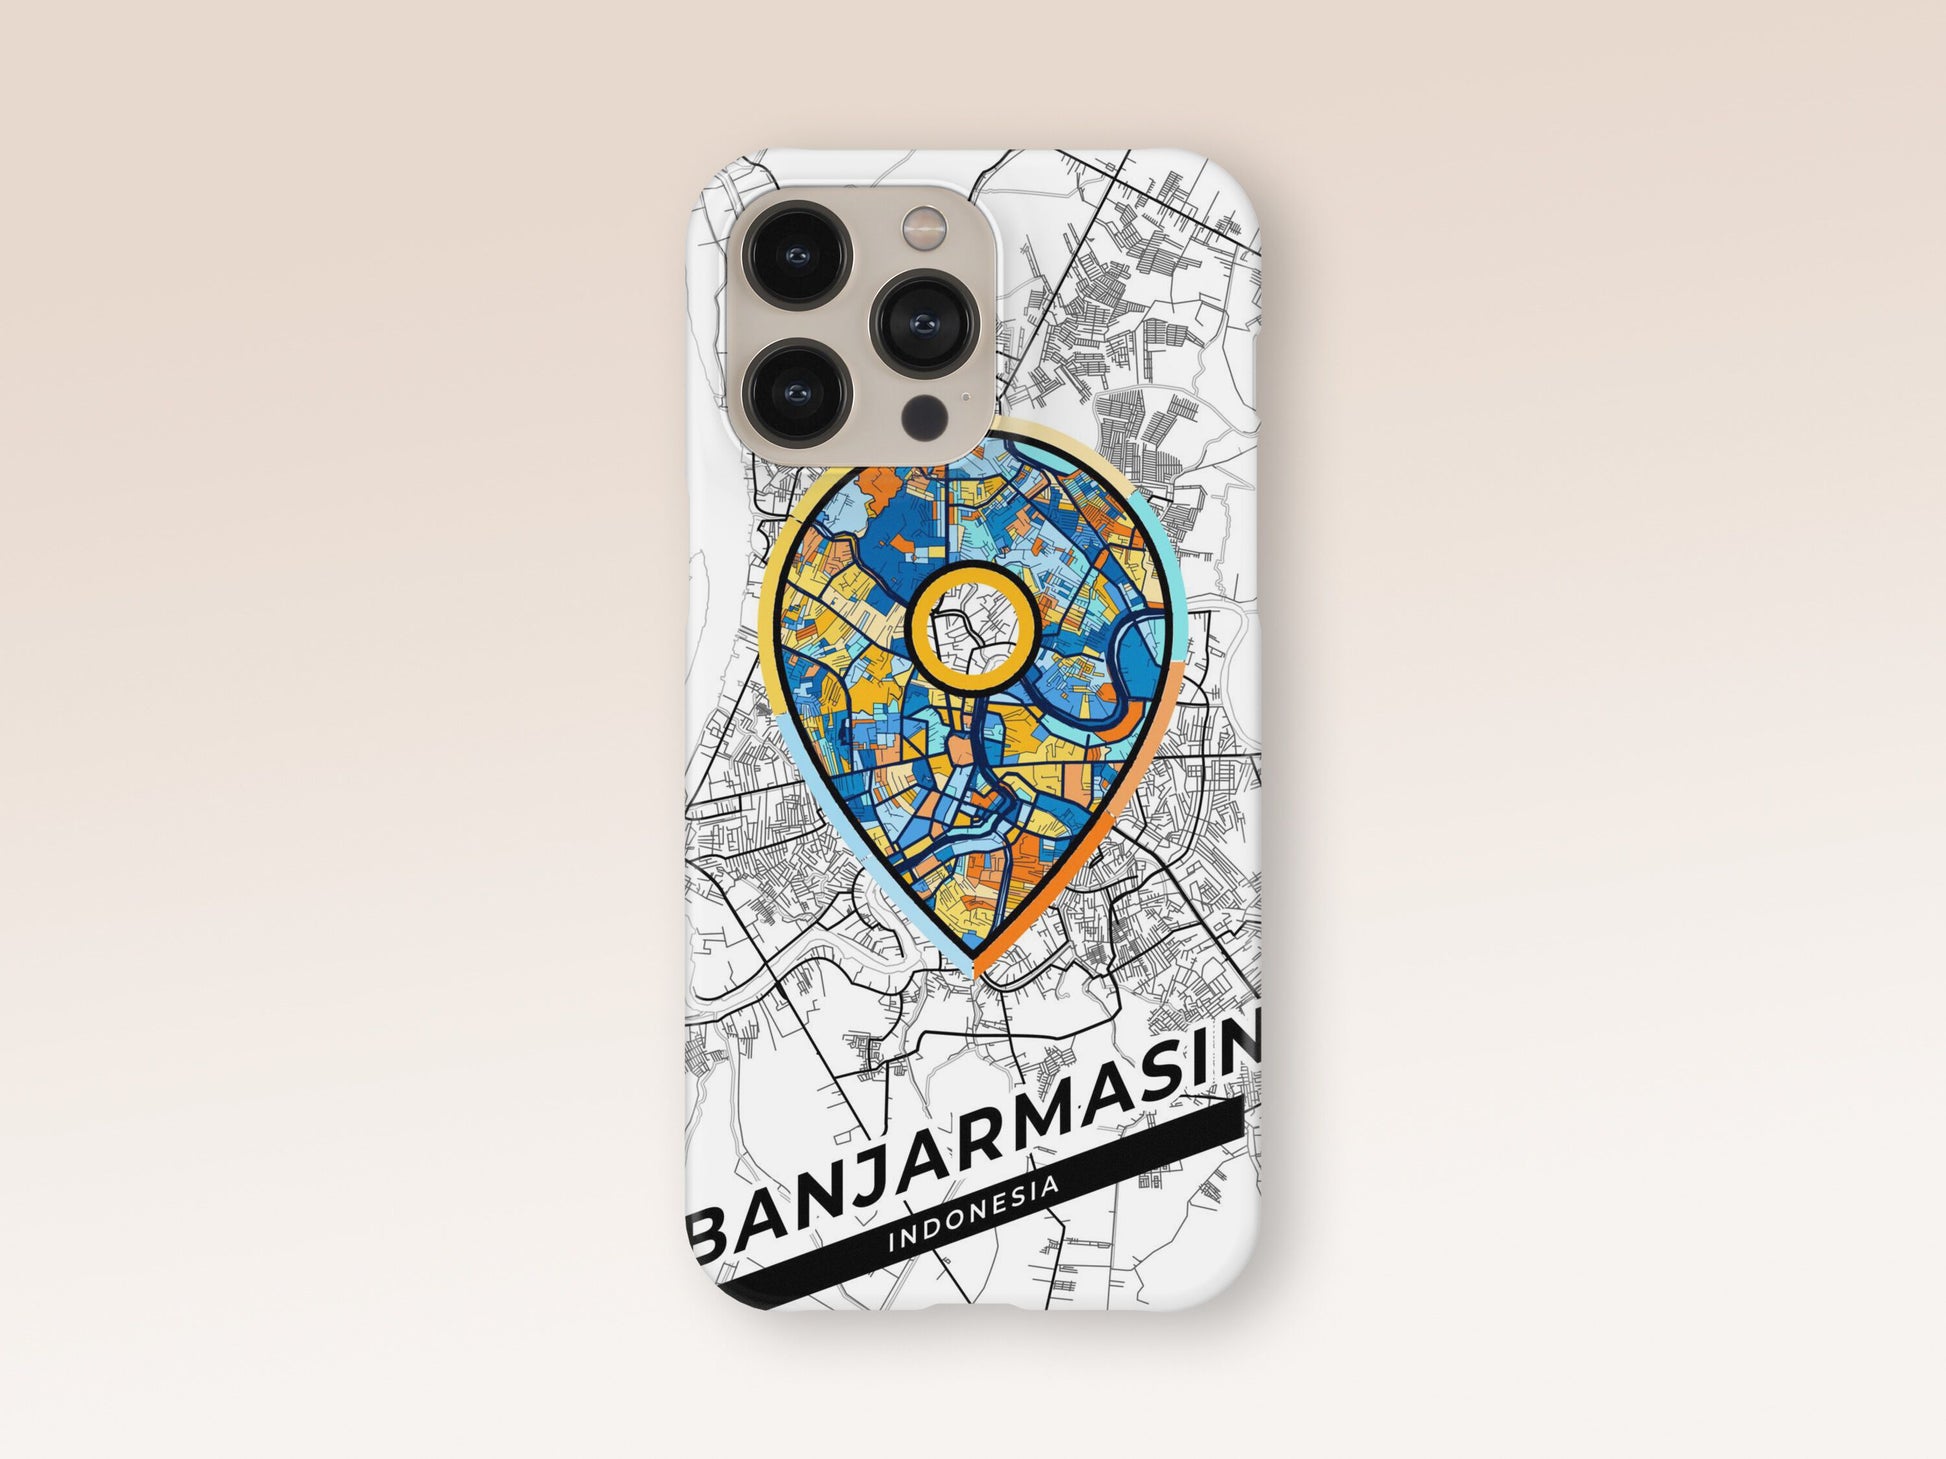 Banjarmasin Indonesia slim phone case with colorful icon. Birthday, wedding or housewarming gift. Couple match cases. 1